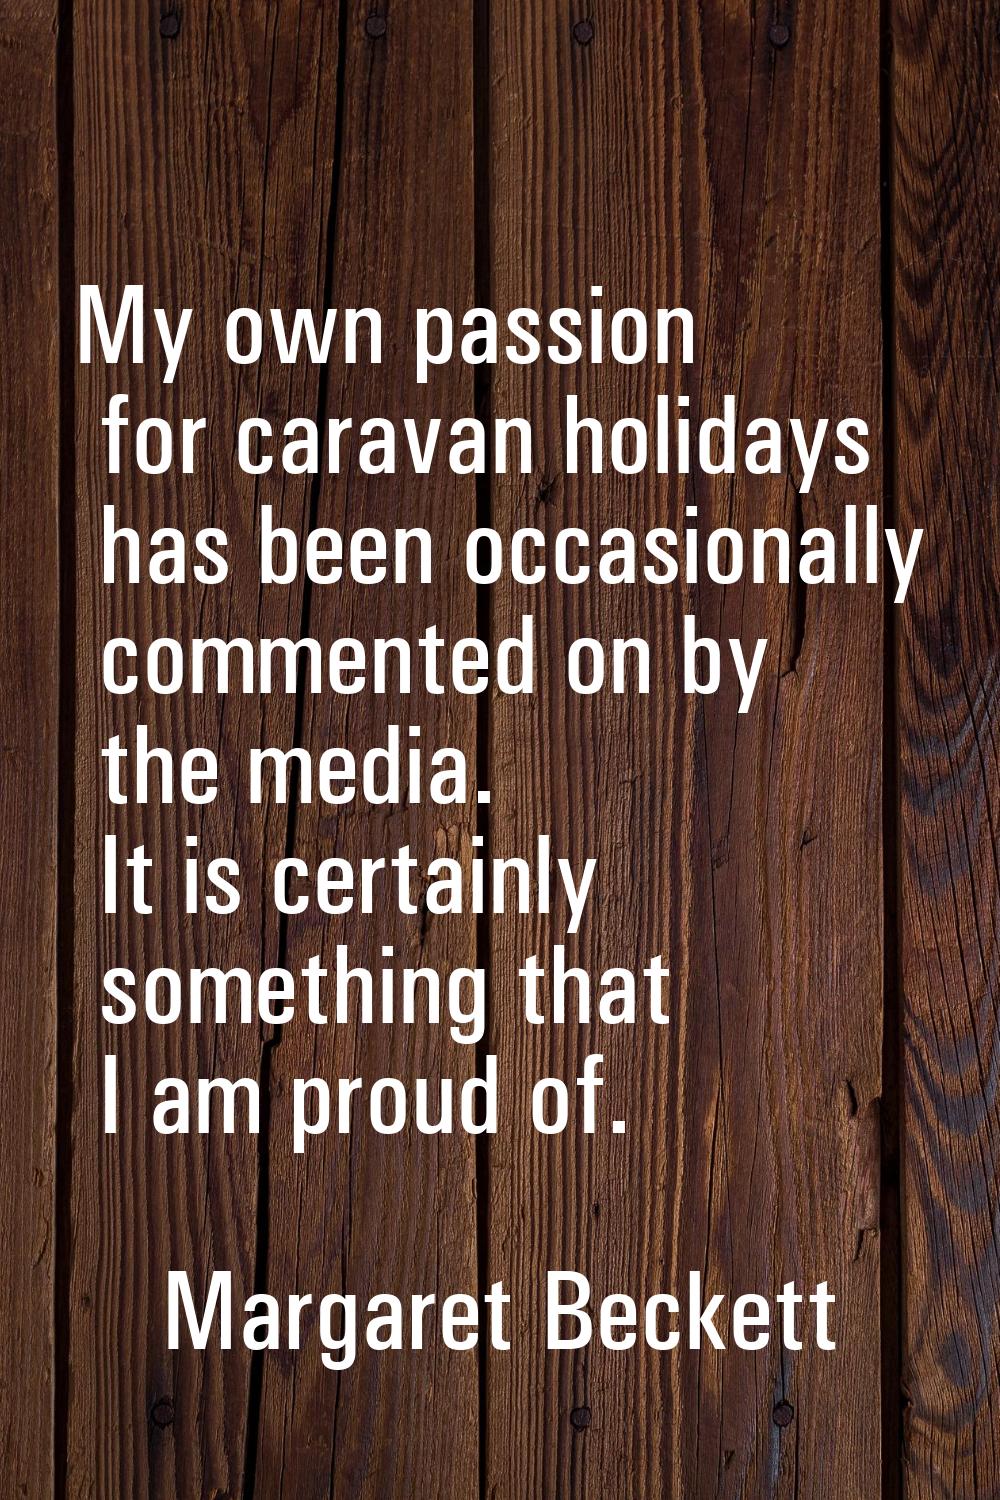 My own passion for caravan holidays has been occasionally commented on by the media. It is certainl